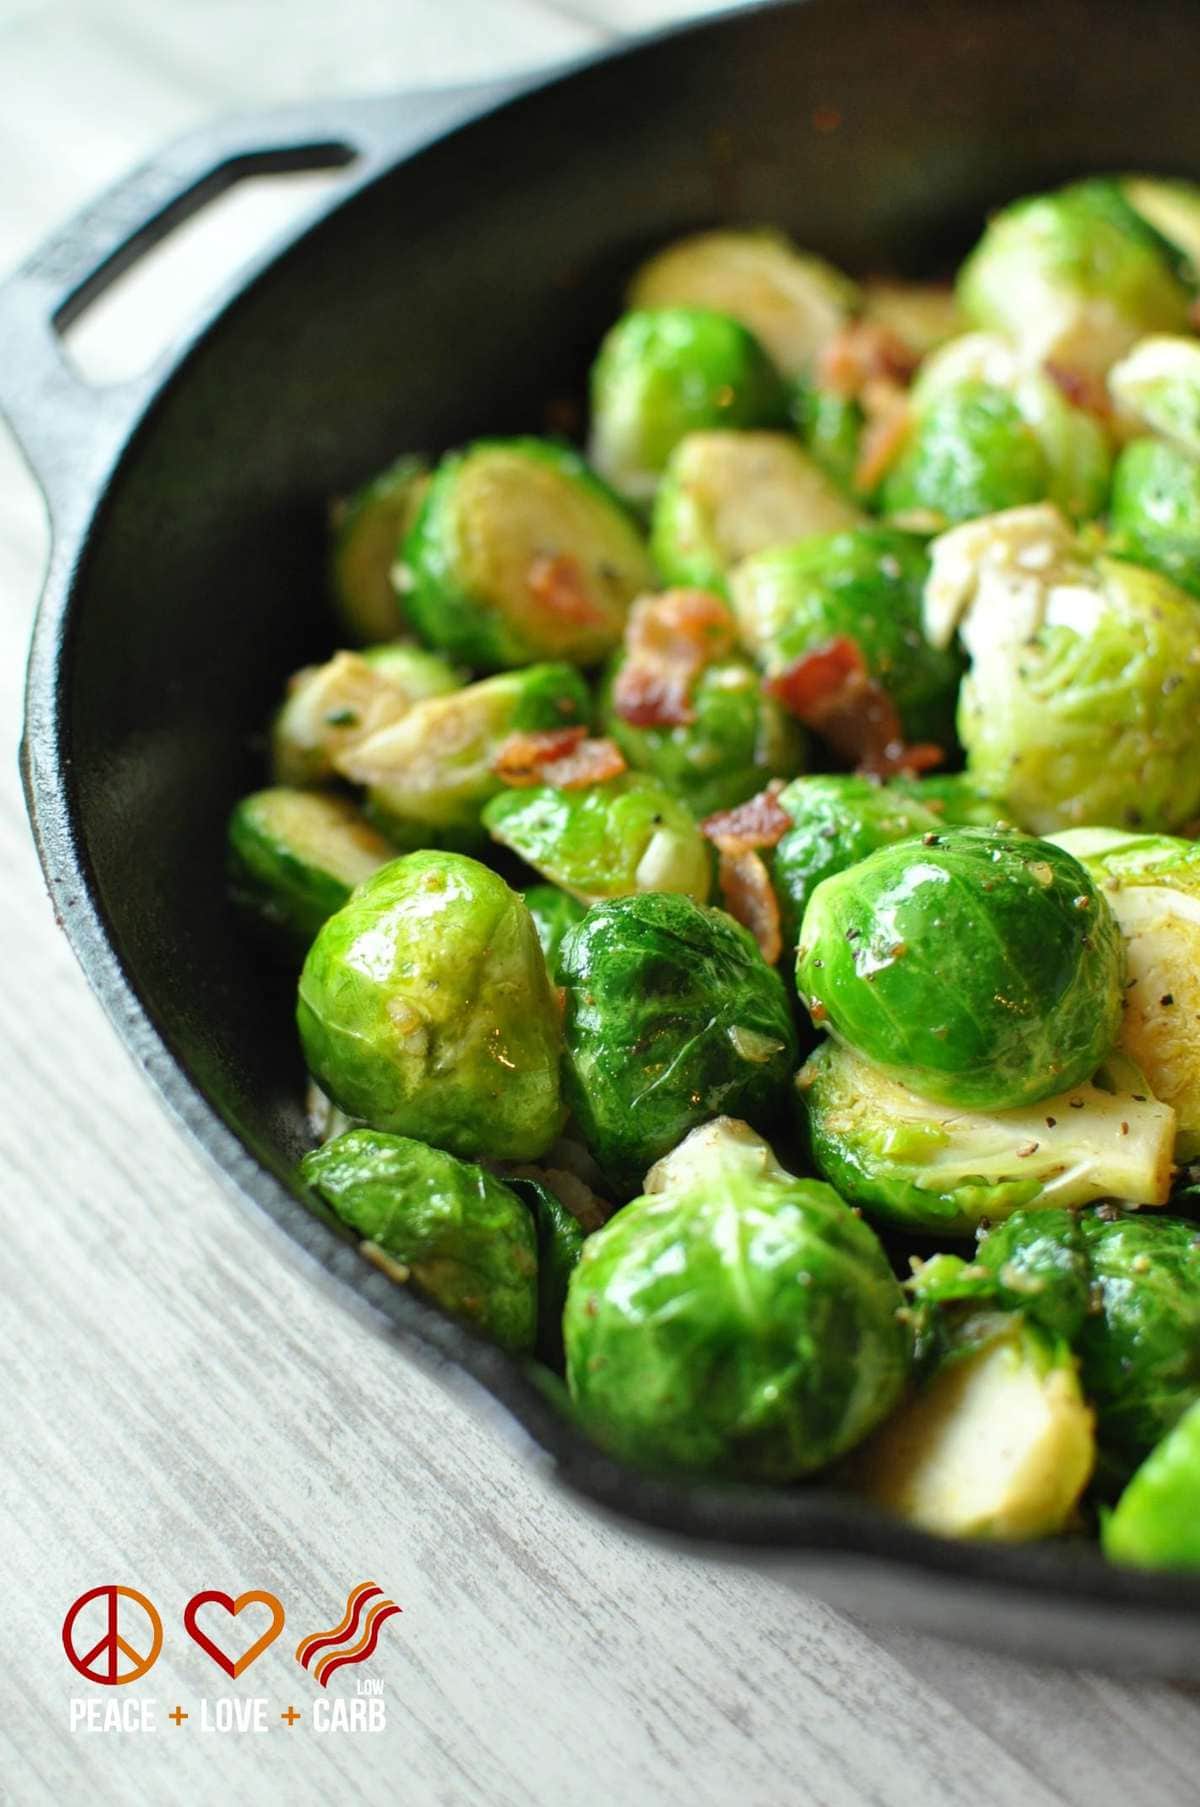 Skillet Roasted Bacon Brussels Sprouts with Garlic Parmesan Cream Sauce